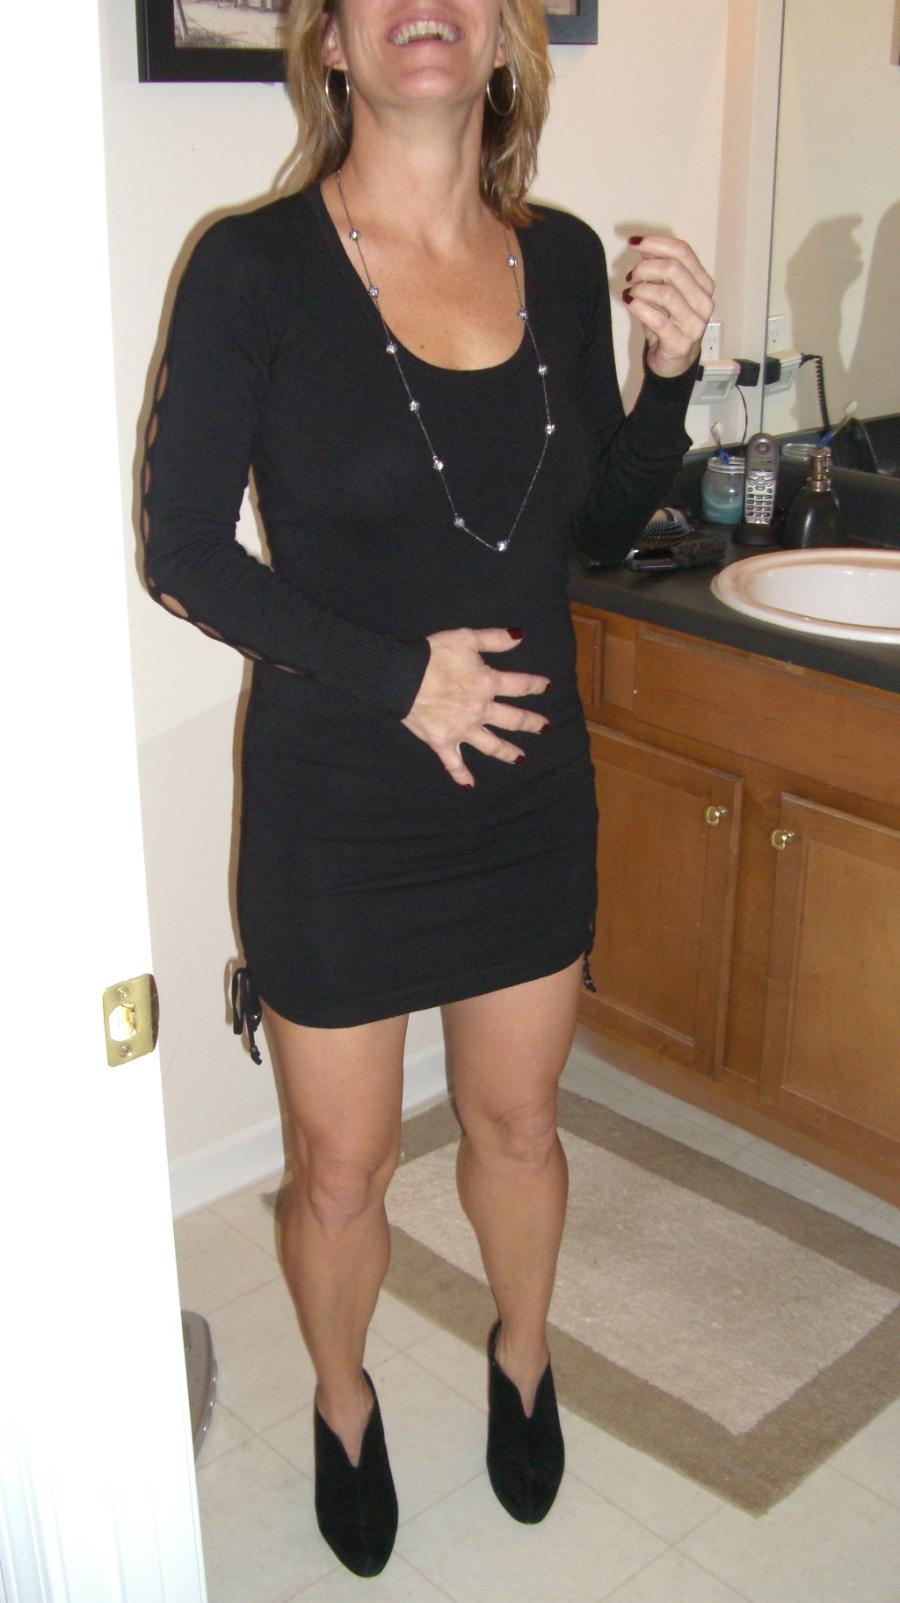 MILF Dressed to Kill in Chicago